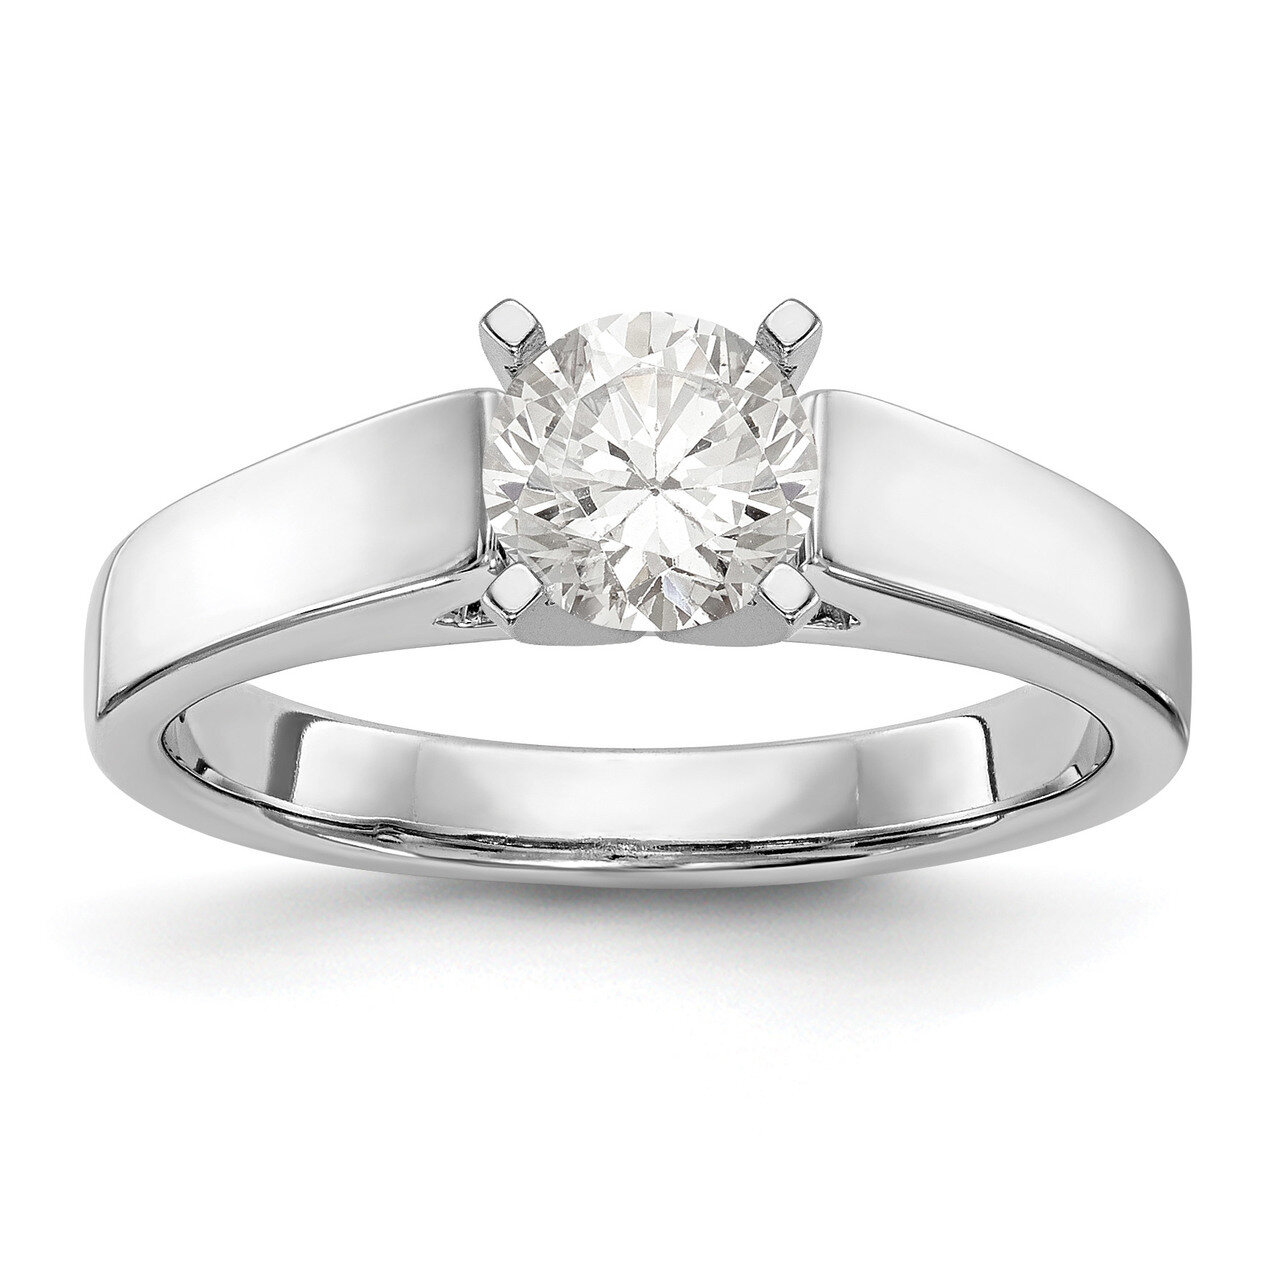 Peg Set Solitaire Engagement Ring Mounting 14k White Gold RM1969E-3.5WIDE-W